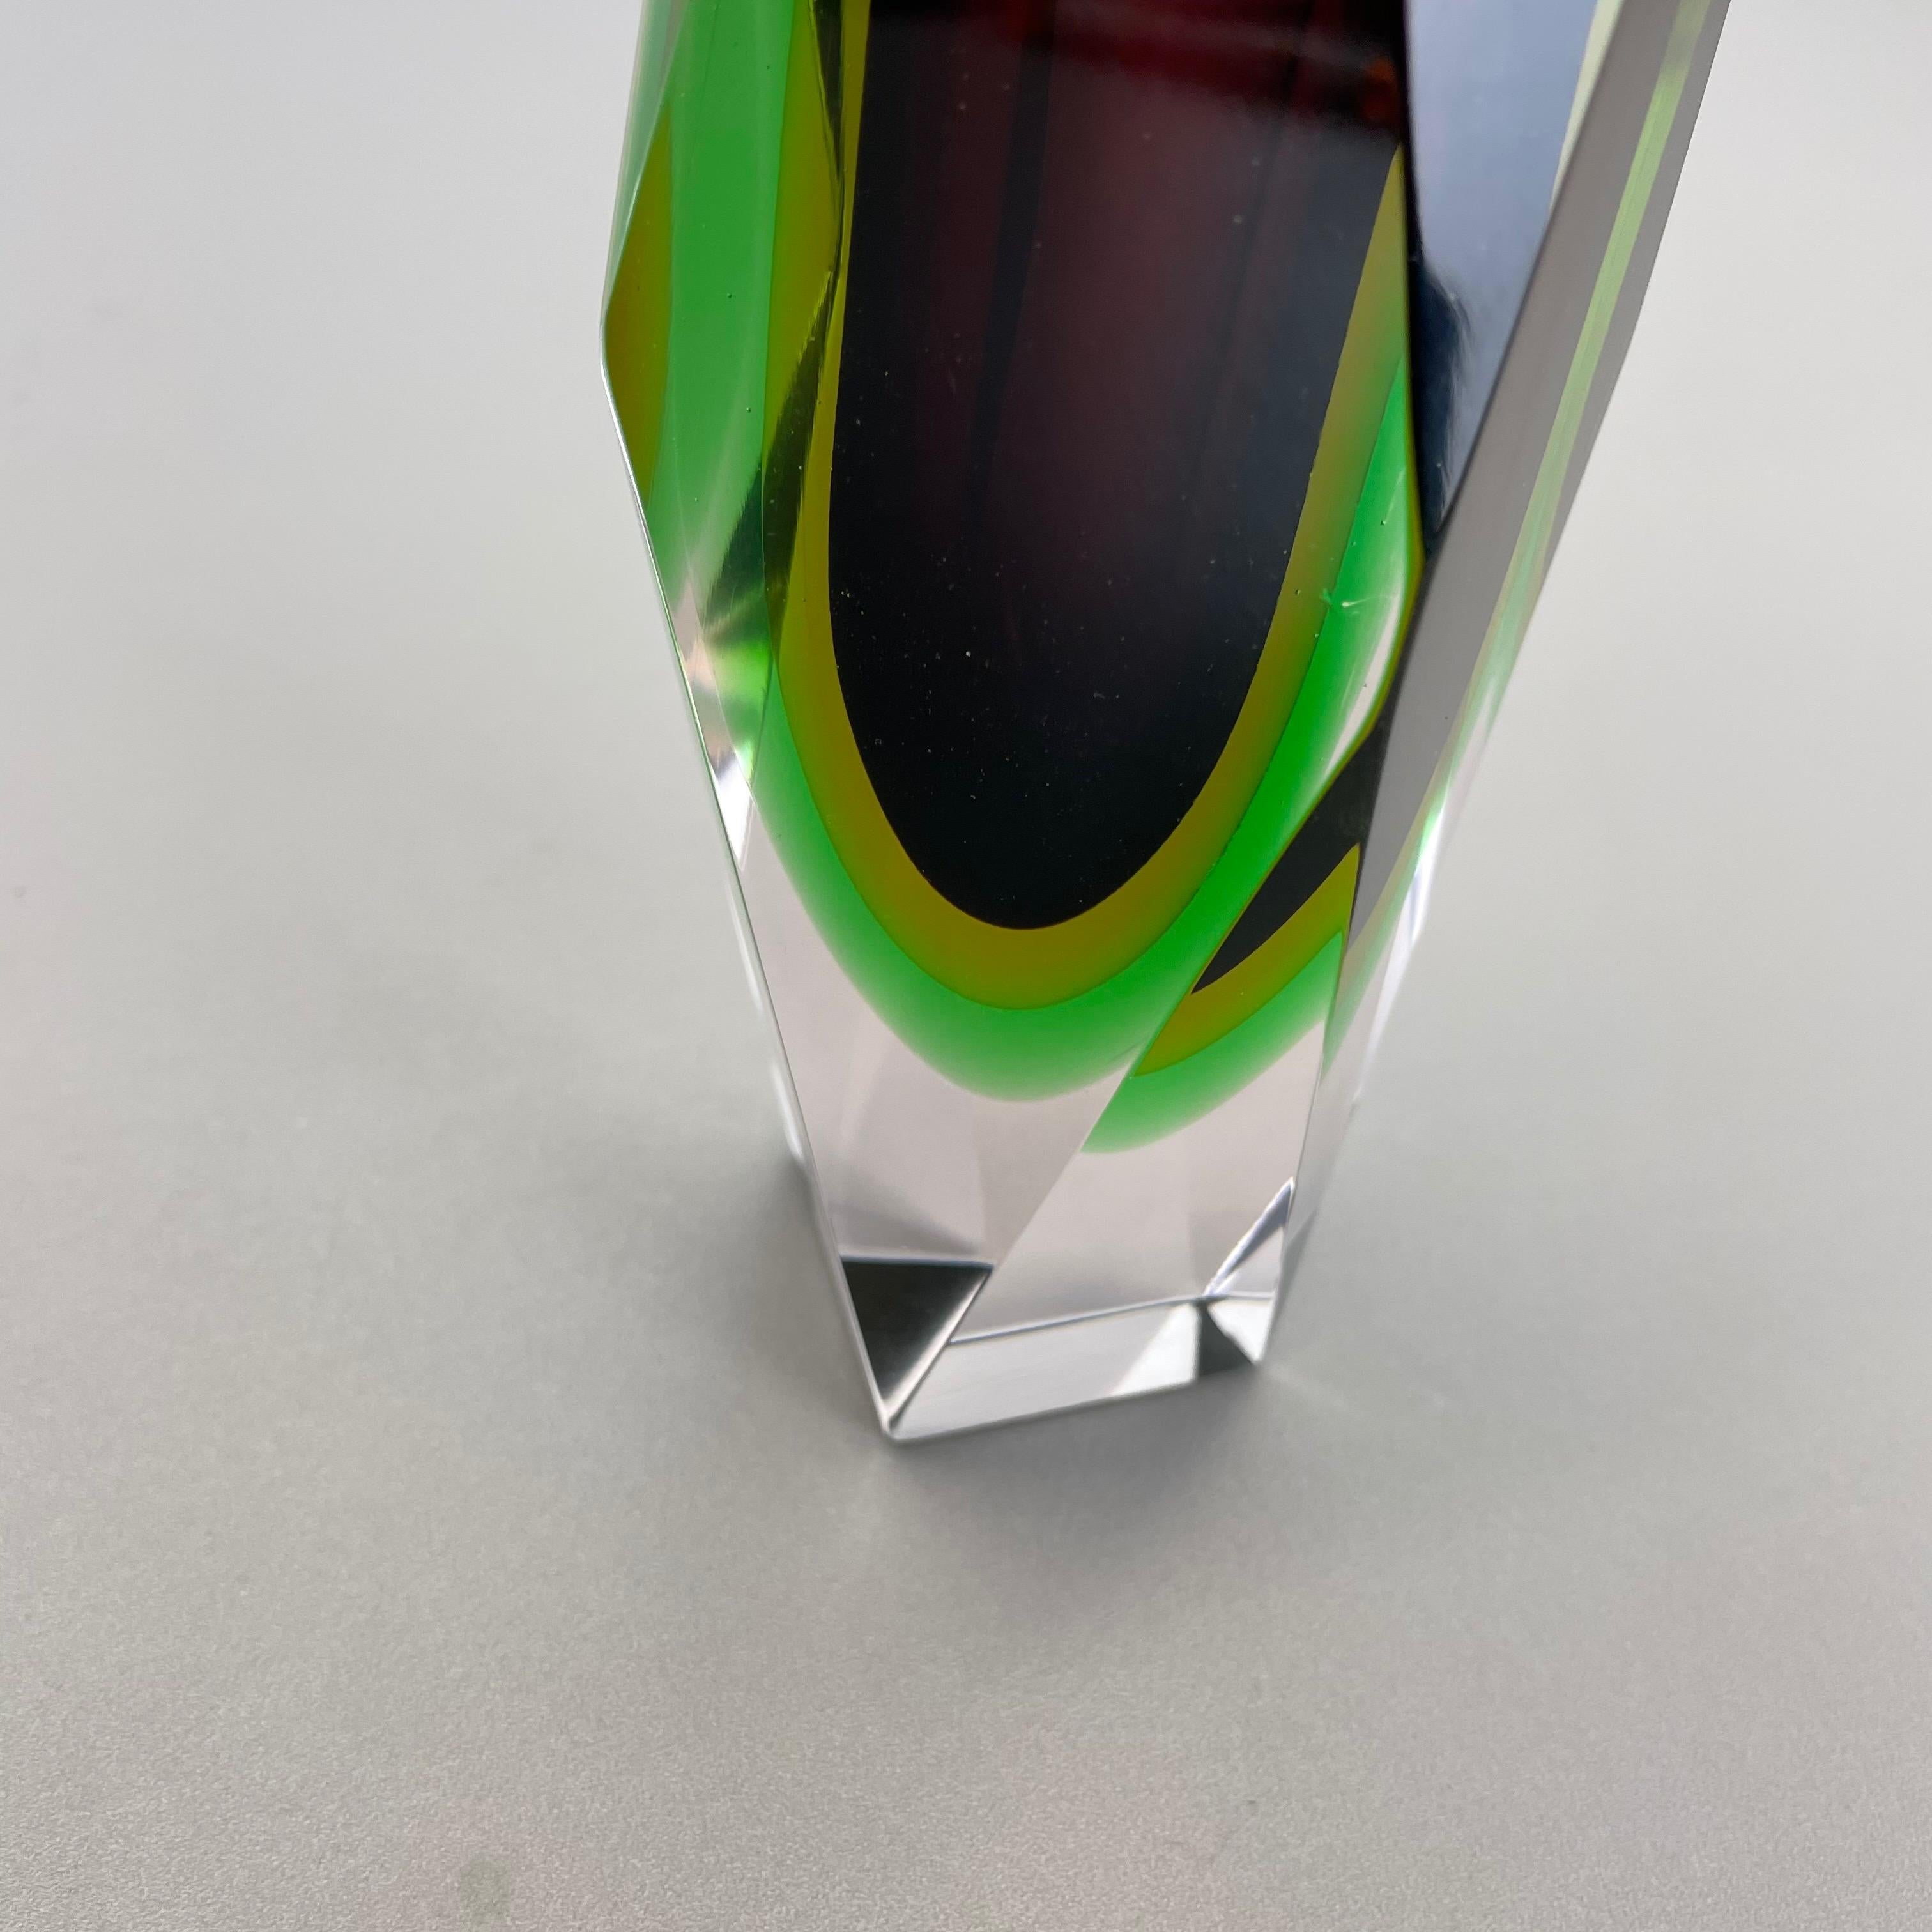 Heavy Large Murano Glass Sommerso 4 Colors Vase by Flavio Poli, Italy, 1970s For Sale 5